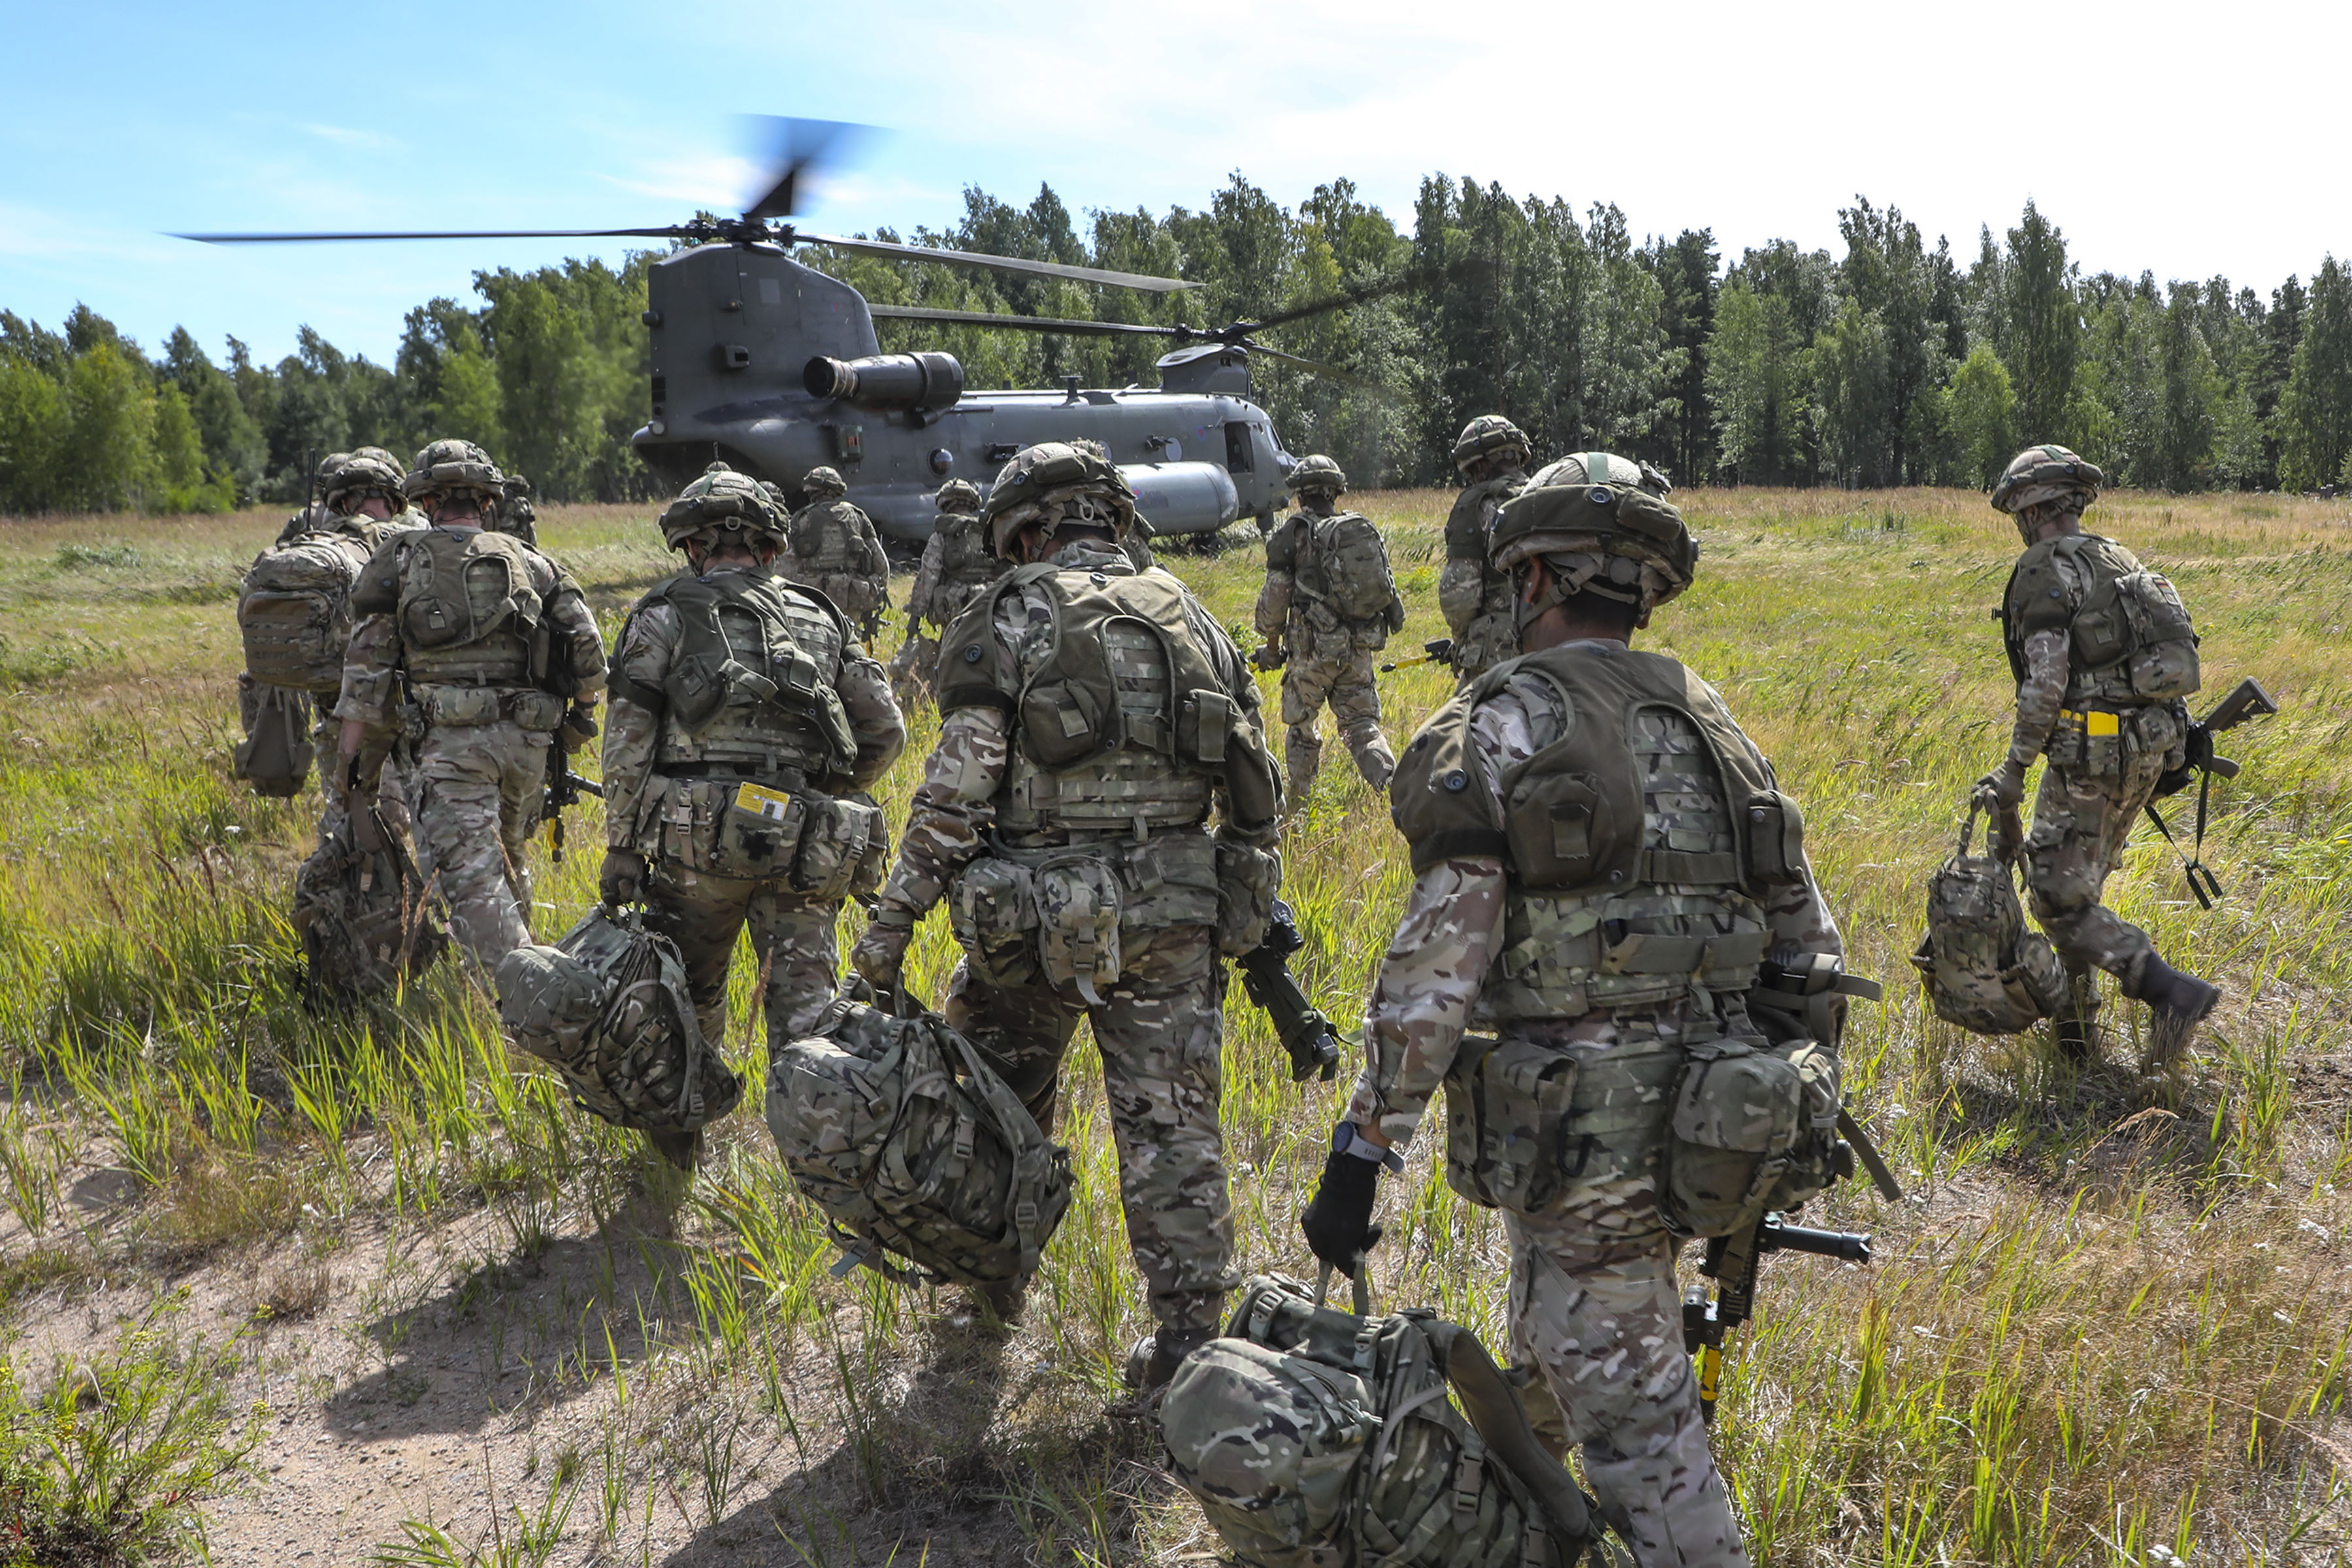 Image shows RAF Regiment walking towards Chinook with baggage and rifles.